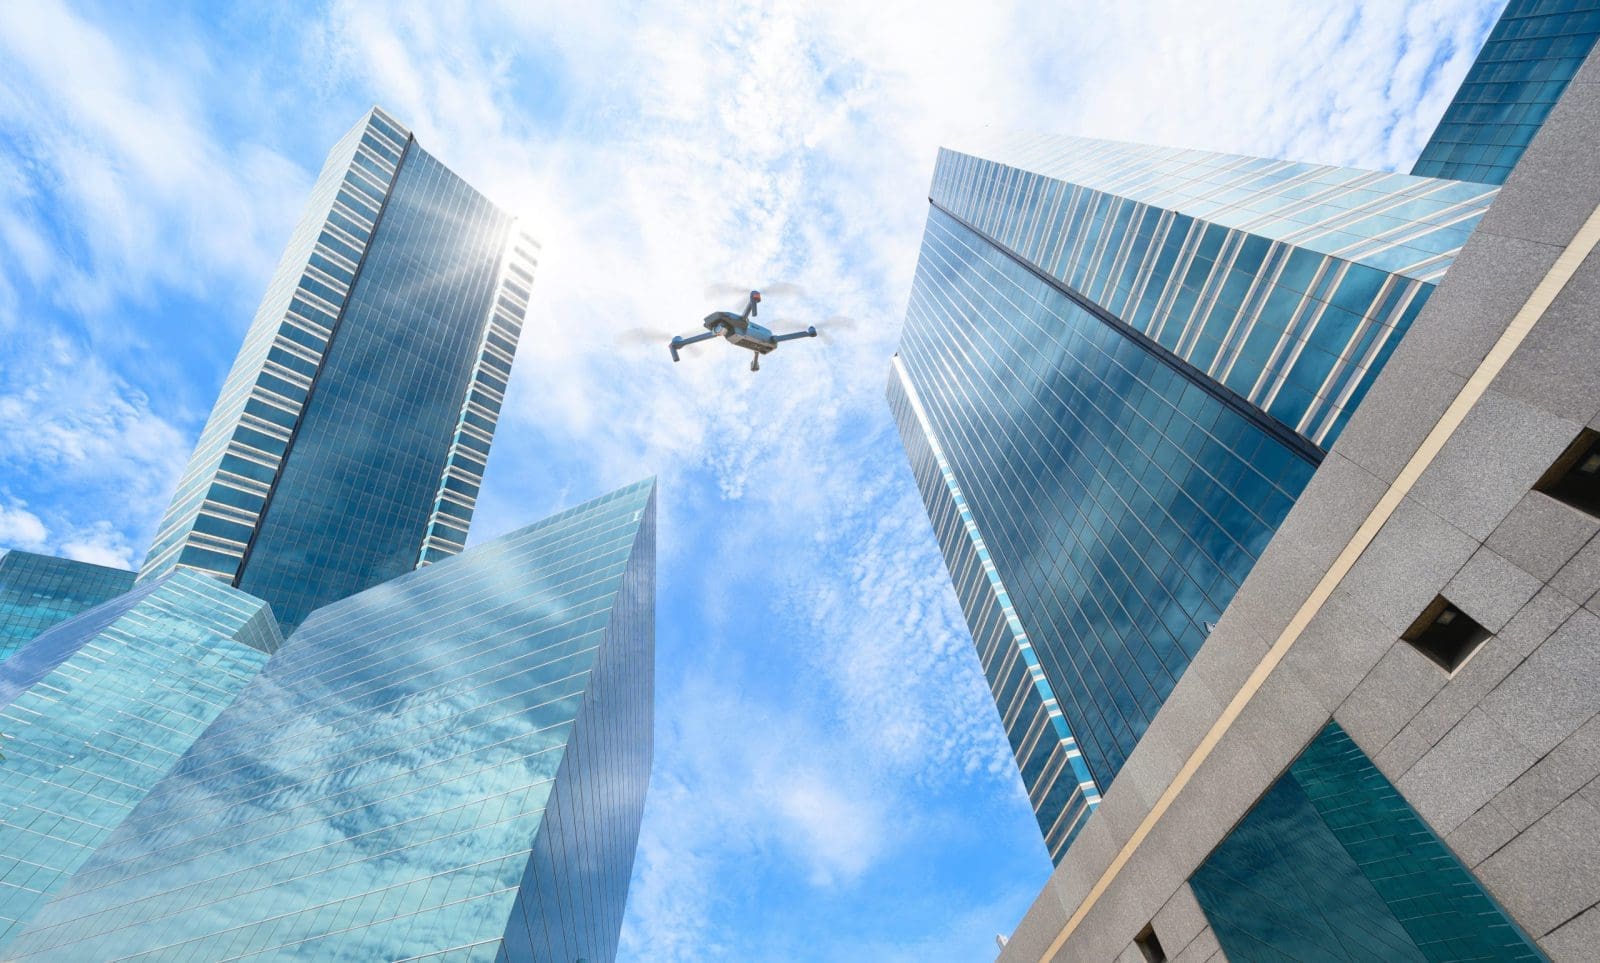 A drone, adhering to strict regulations, flying amidst towering skyscrapers under a partly cloudy sky.